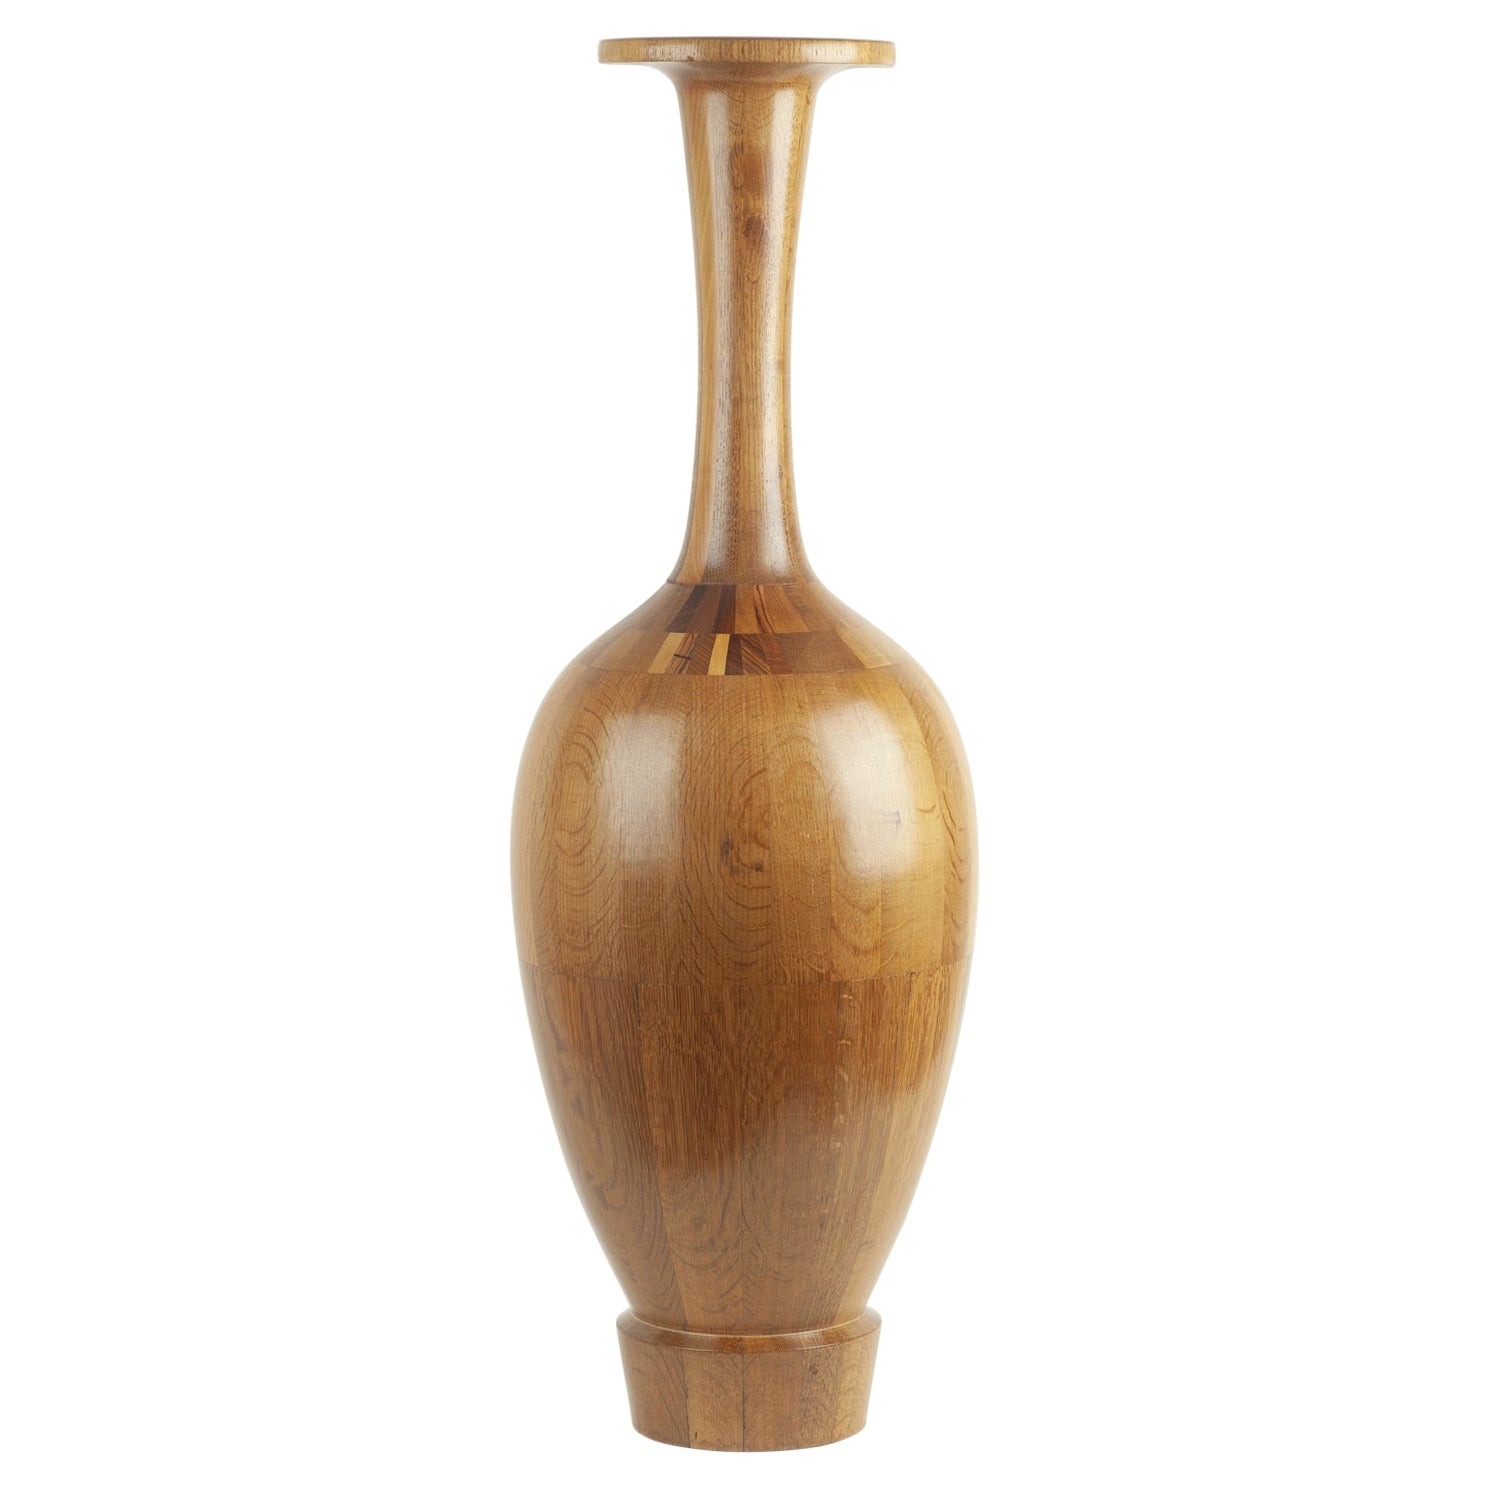 Tall Wooden Vase by Maurice Bonami, Attributed to De Coene Frères For Sale